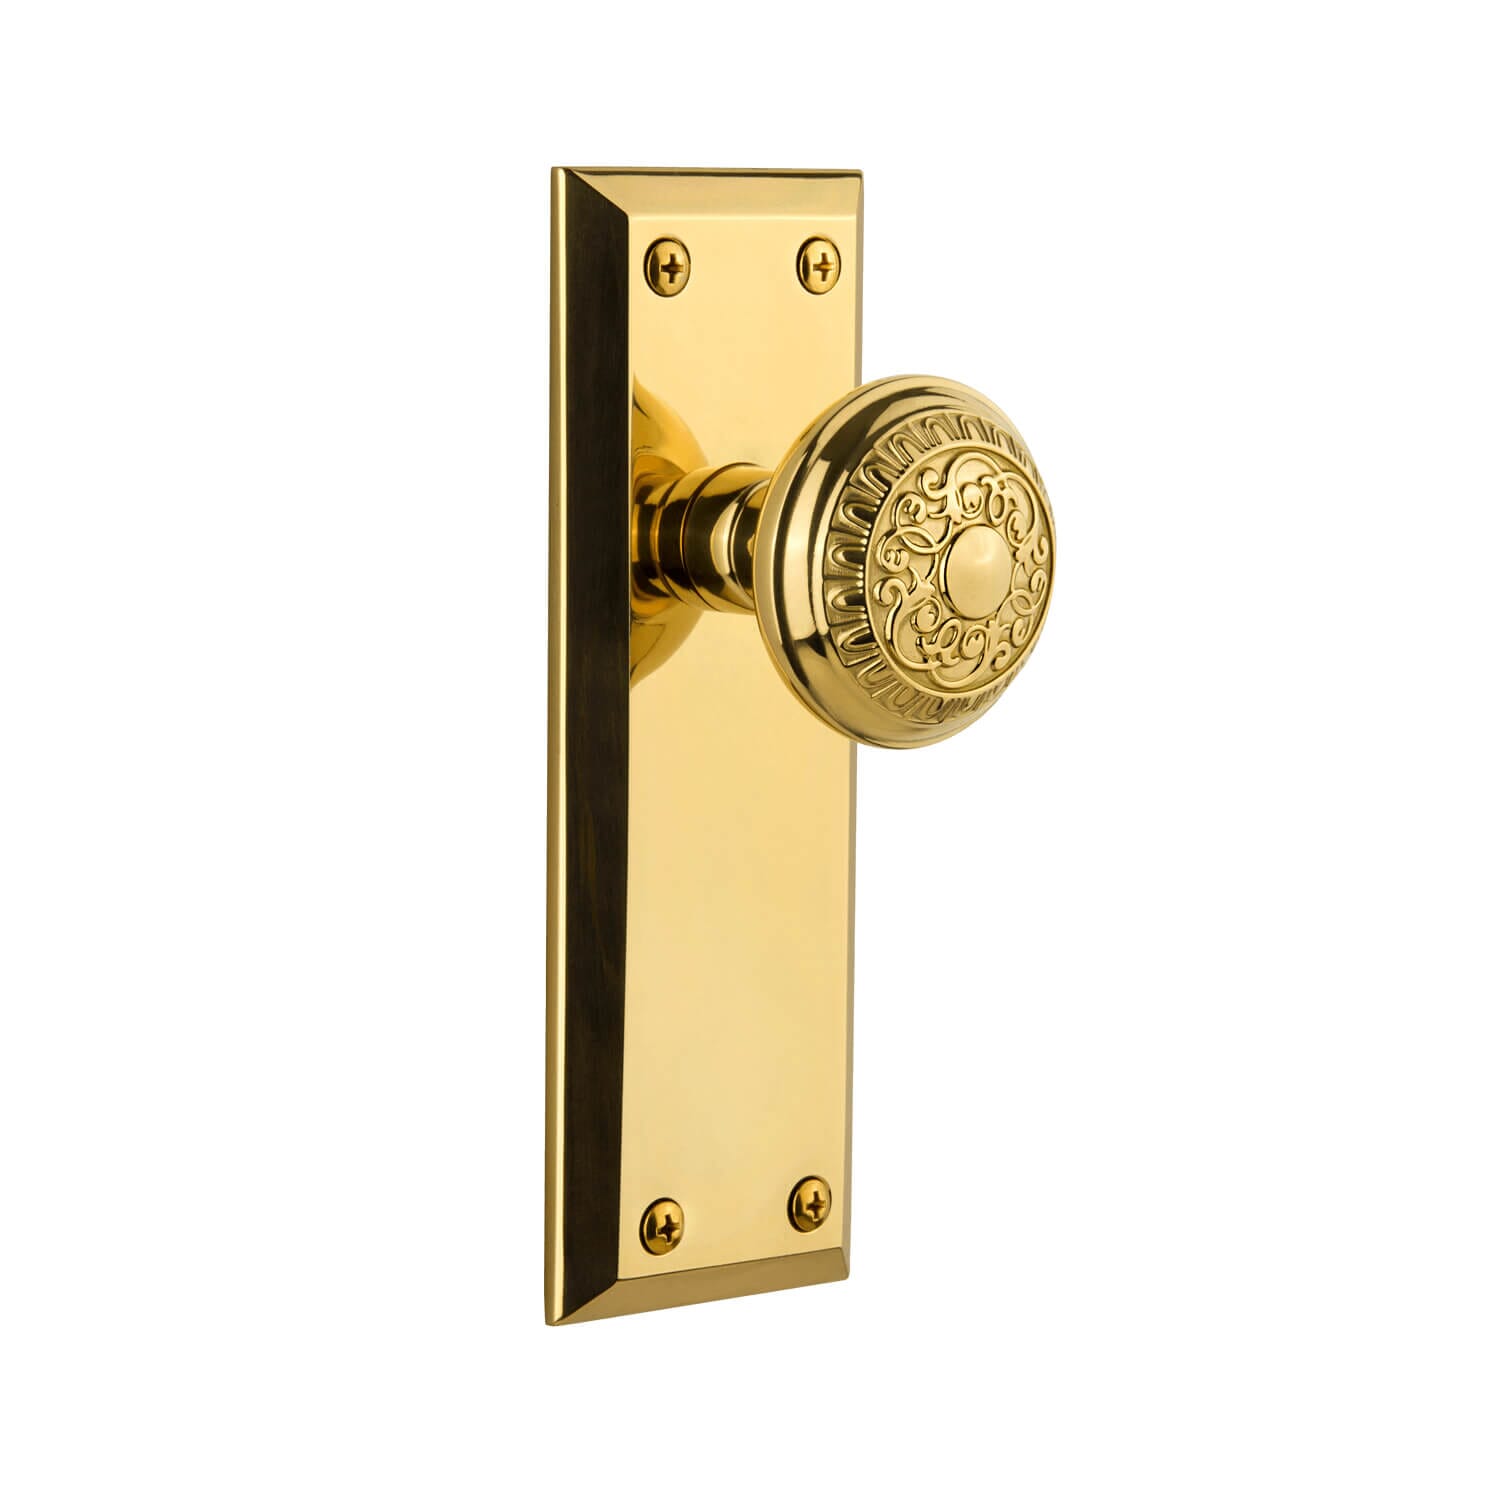 Master Lock Keyed Entry Door Lock, Single Cylinder Deadbolt with matching  Tulip Style Knob, Antique Brass, TUCO0605,Combo - Doorknobs 